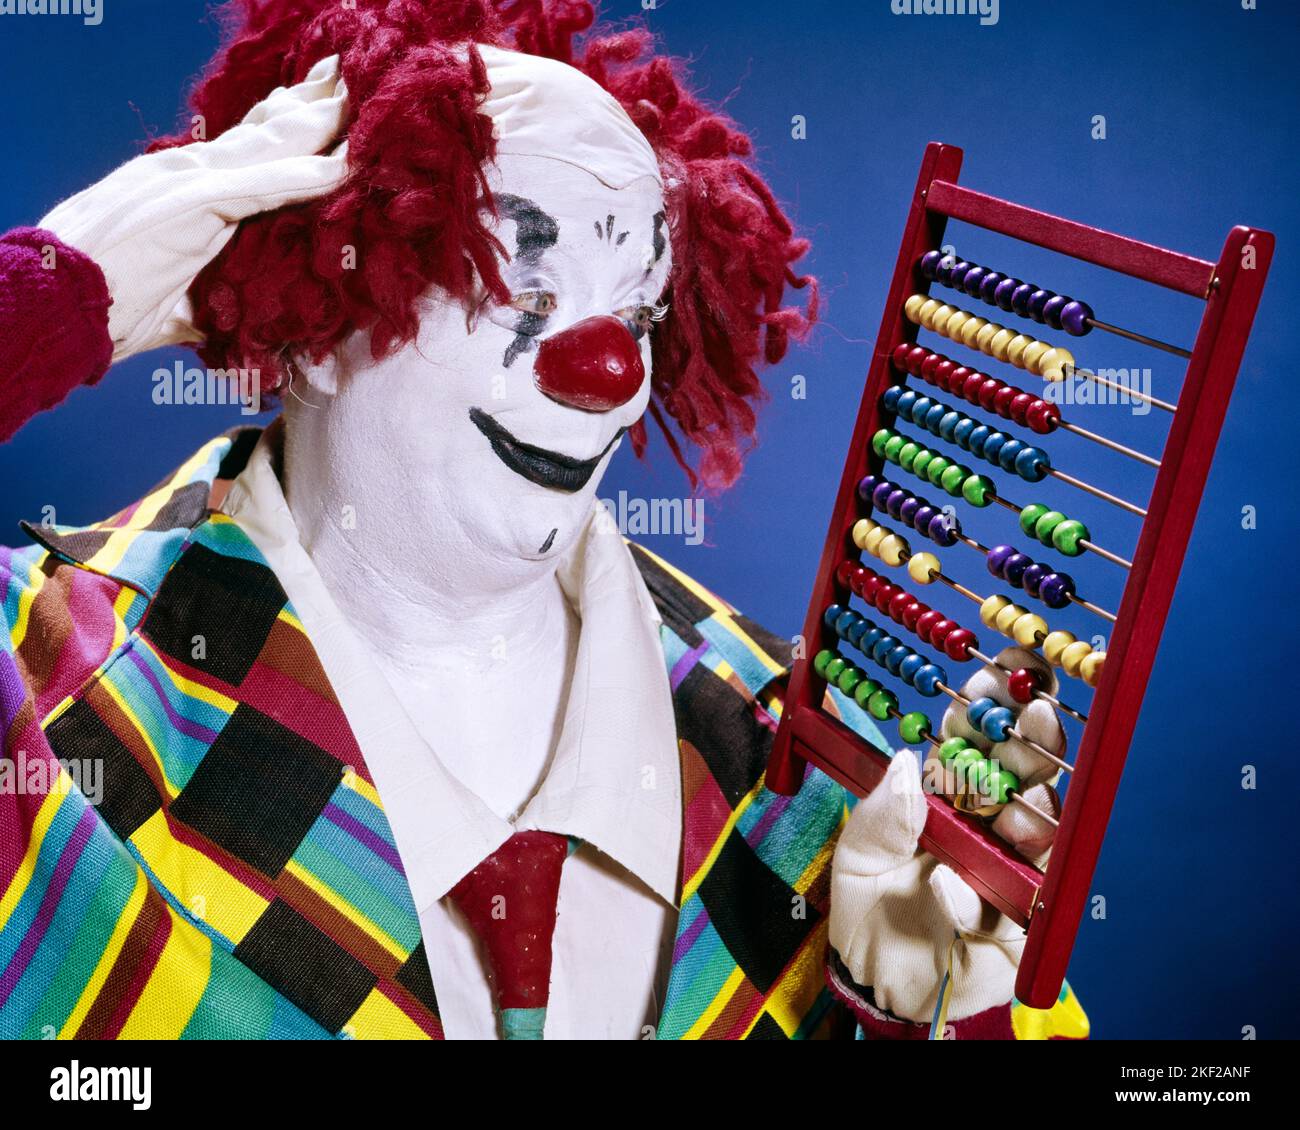 1960s WHITEFACE CLOWN IN RED MOP YARN WIG RED NOSE SCRATCHING HIS HEAD TRYING TO FIGURE NUMBERS ON AN ABACUS COUNTING FRAME - kc2530 HAR001 HARS CLOWNS HUMOROUS HEAD AND SHOULDERS DISCOVERY HIS PERFORMER KNOWLEDGE TRYING MAKE UP COMICAL BEADS ENTERTAINER OCCUPATIONS WHITEFACE CONCEPTUAL CLOWN WHITE COMEDY JESTER SCRATCHING BAFFLED CALCULATIONS MID-ADULT MID-ADULT MAN PRECISION CALCULATING FOOL HAR001 OLD FASHIONED PERPLEXED Stock Photo